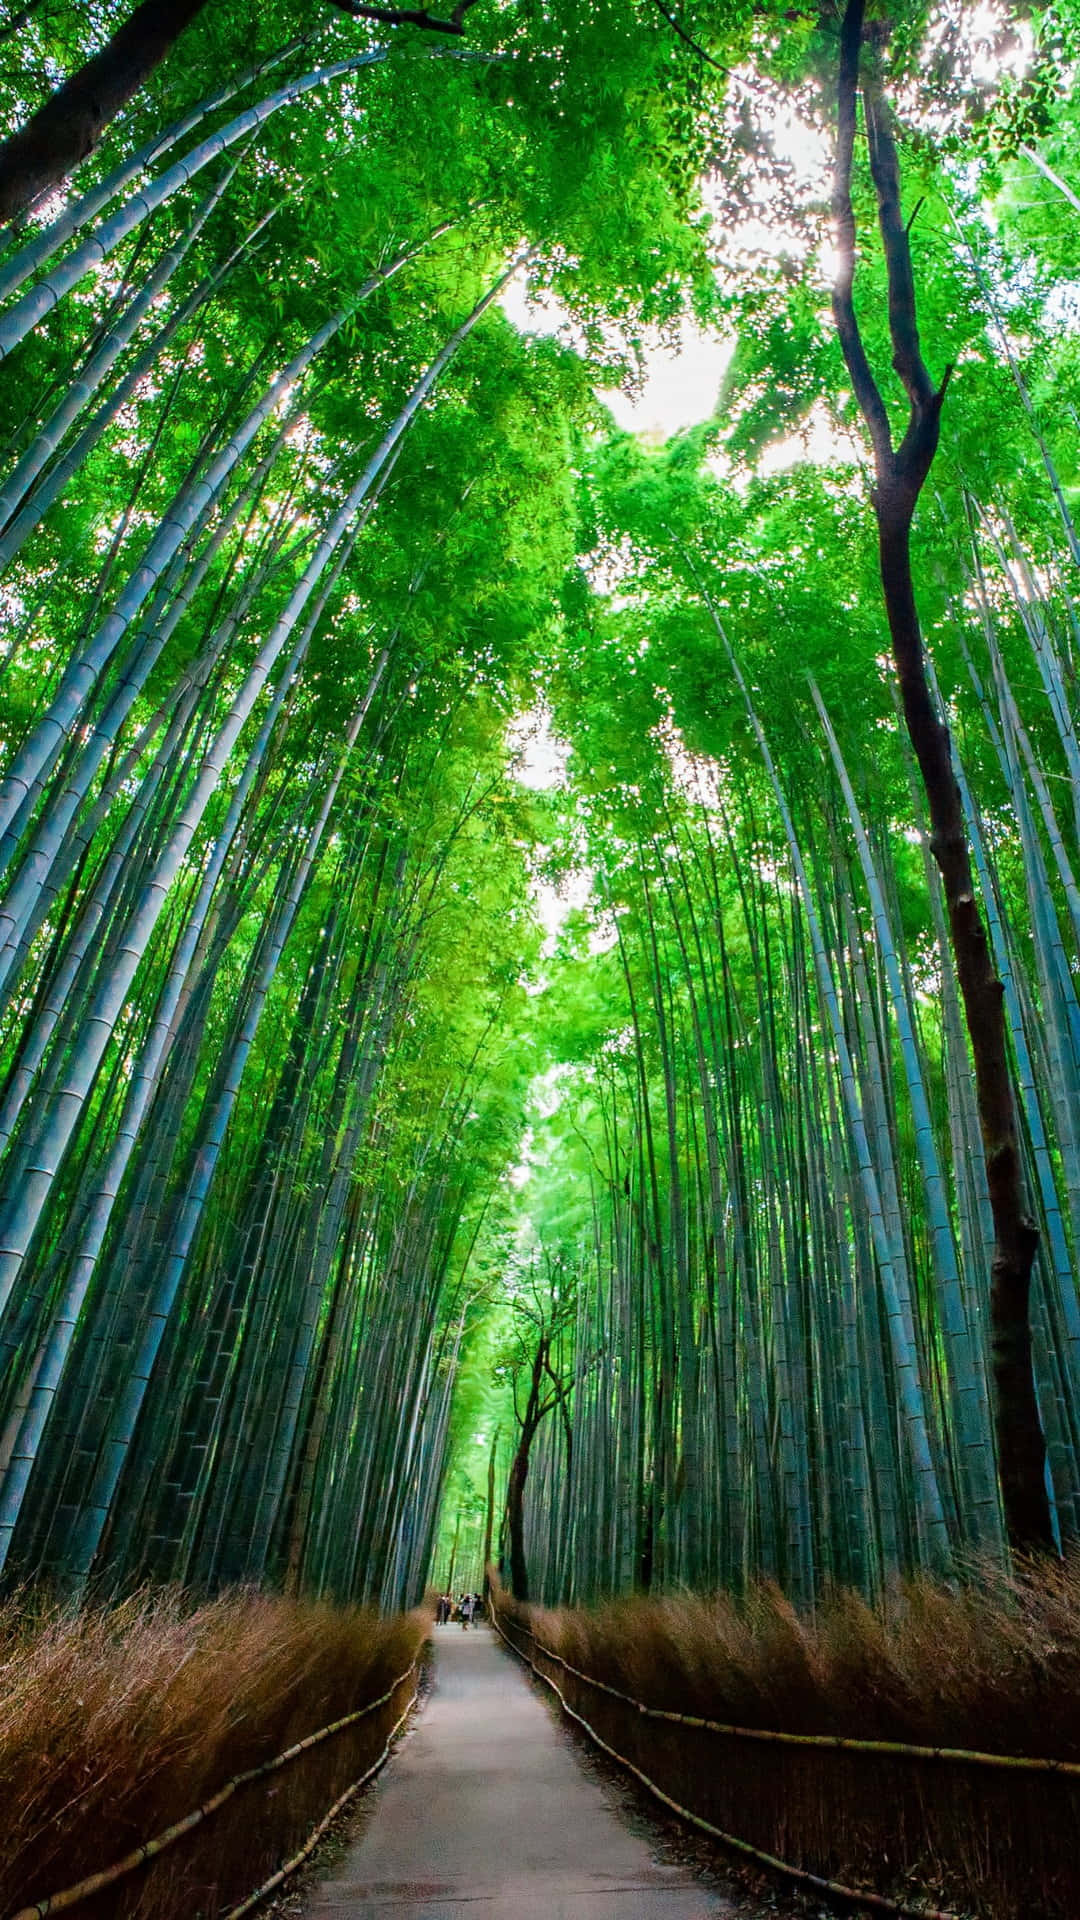 Take A Breath Of Fresh Air In A Serene Bamboo Forest.